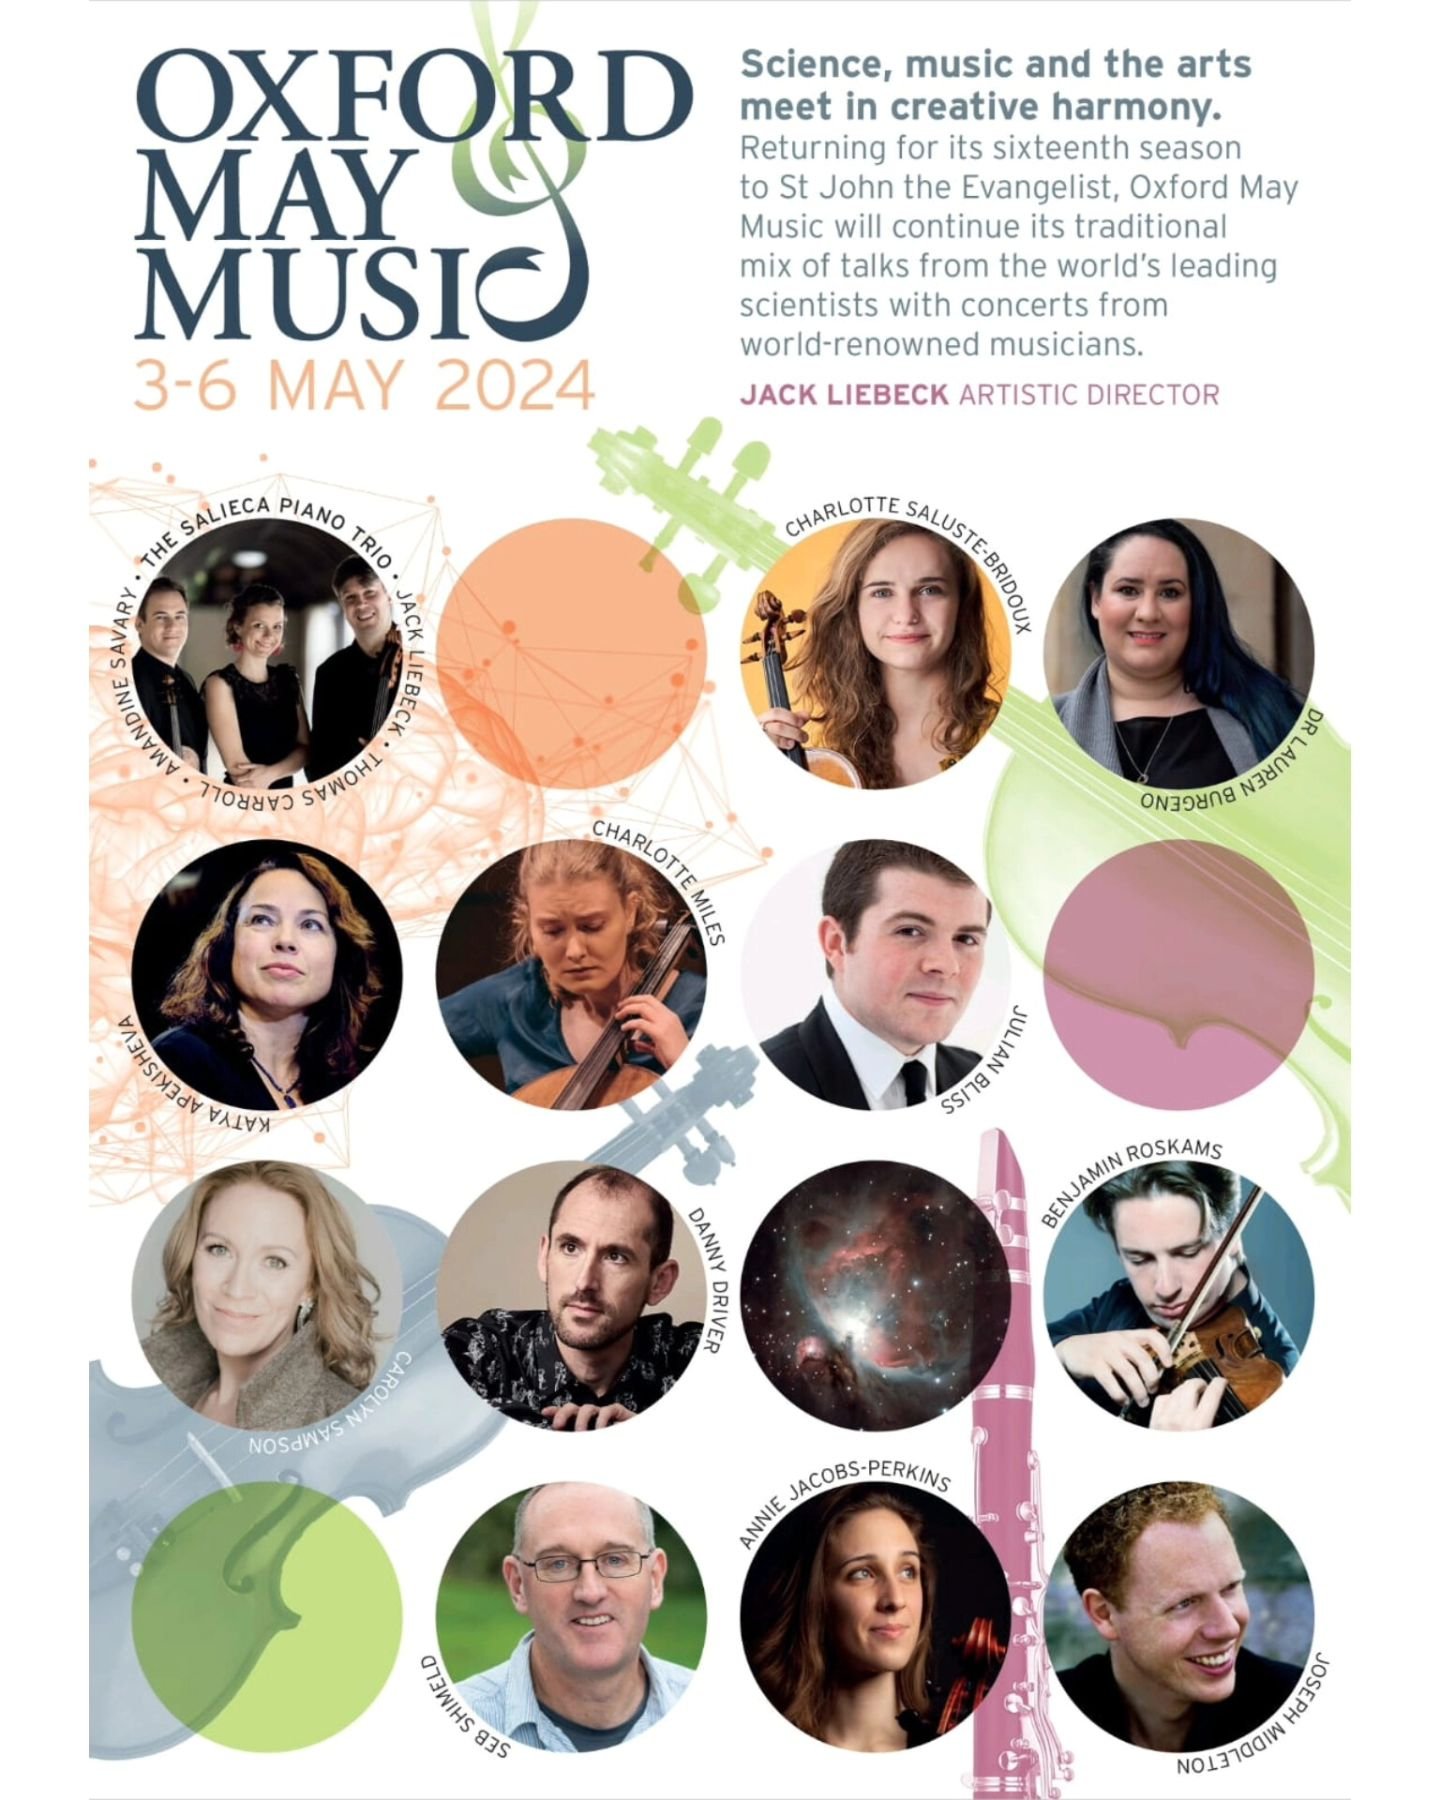 Happy to be back serving as artistic director of the 16th Oxford May Music happening from 3 to 6 May 2024 🙂 Come join us and immerse yourself in a mix of talks from the world's leading scientists with concerts from world-renowned musicians!